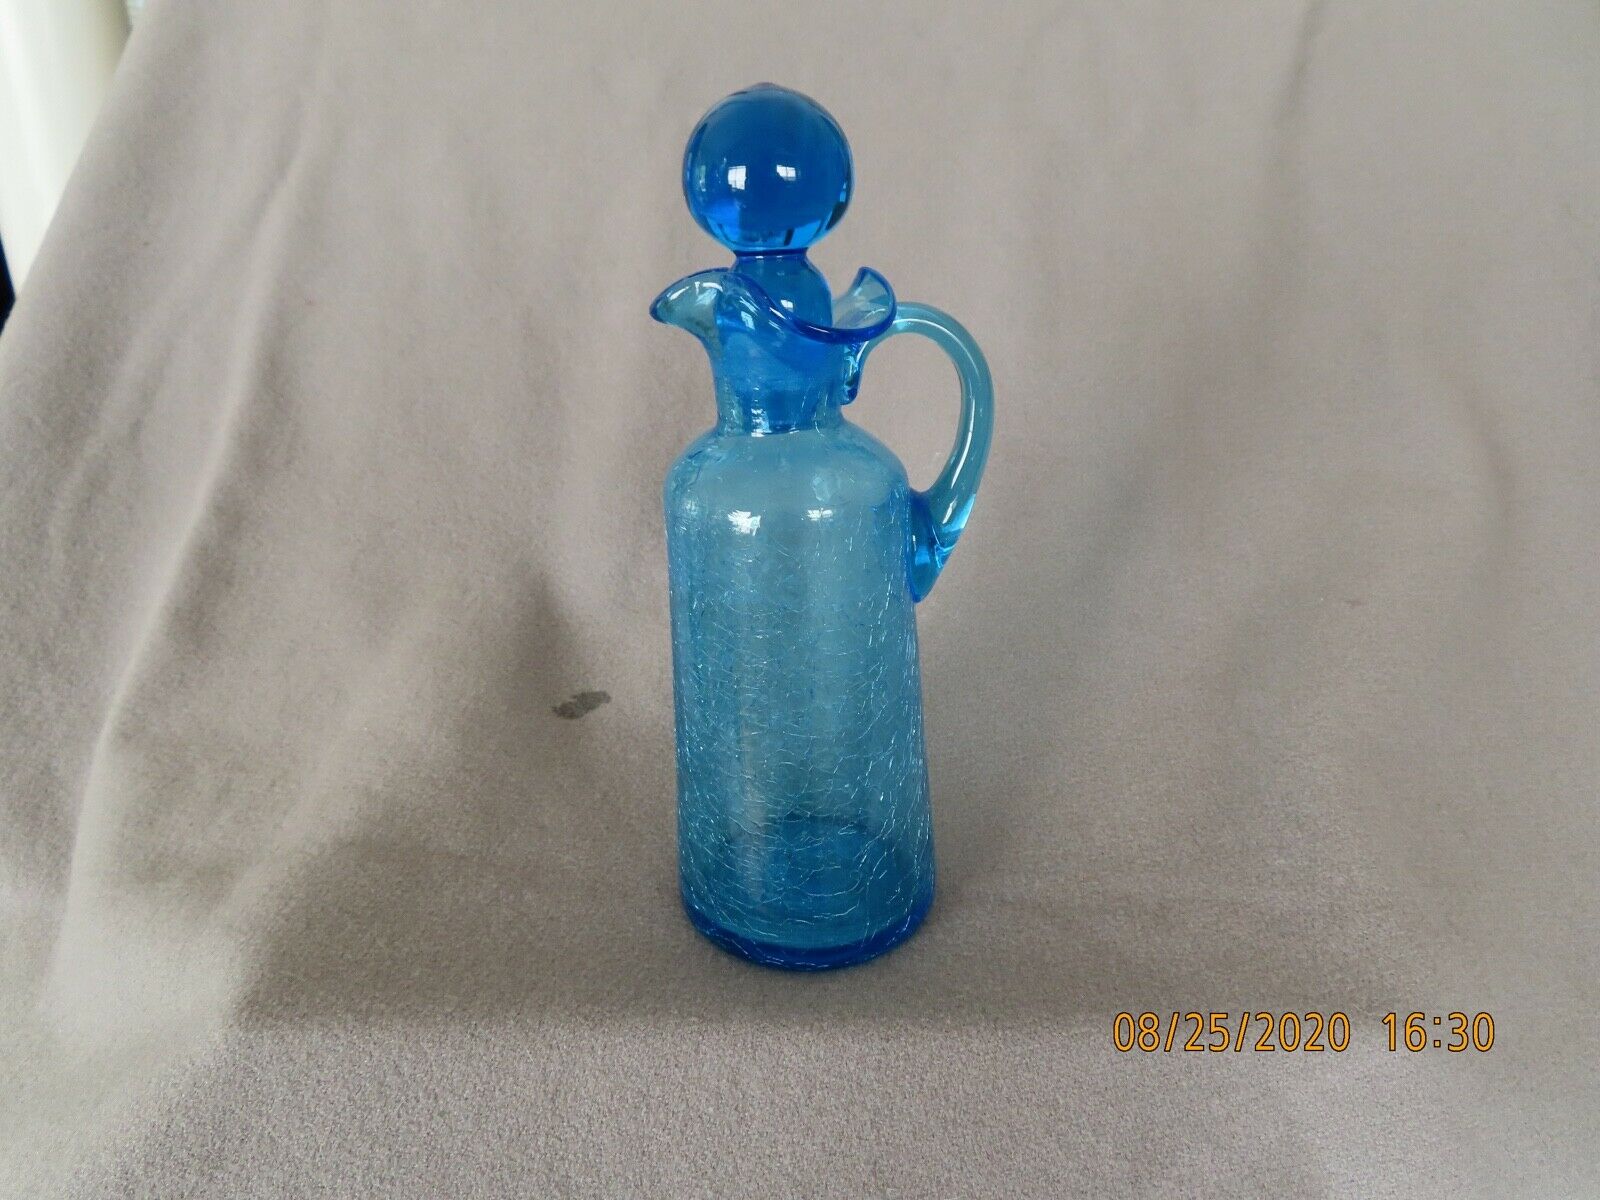 MID-CENTURY ART GLASS PEACOCK BLUE CRACKLE GLASS PITCHER W/STOPPER